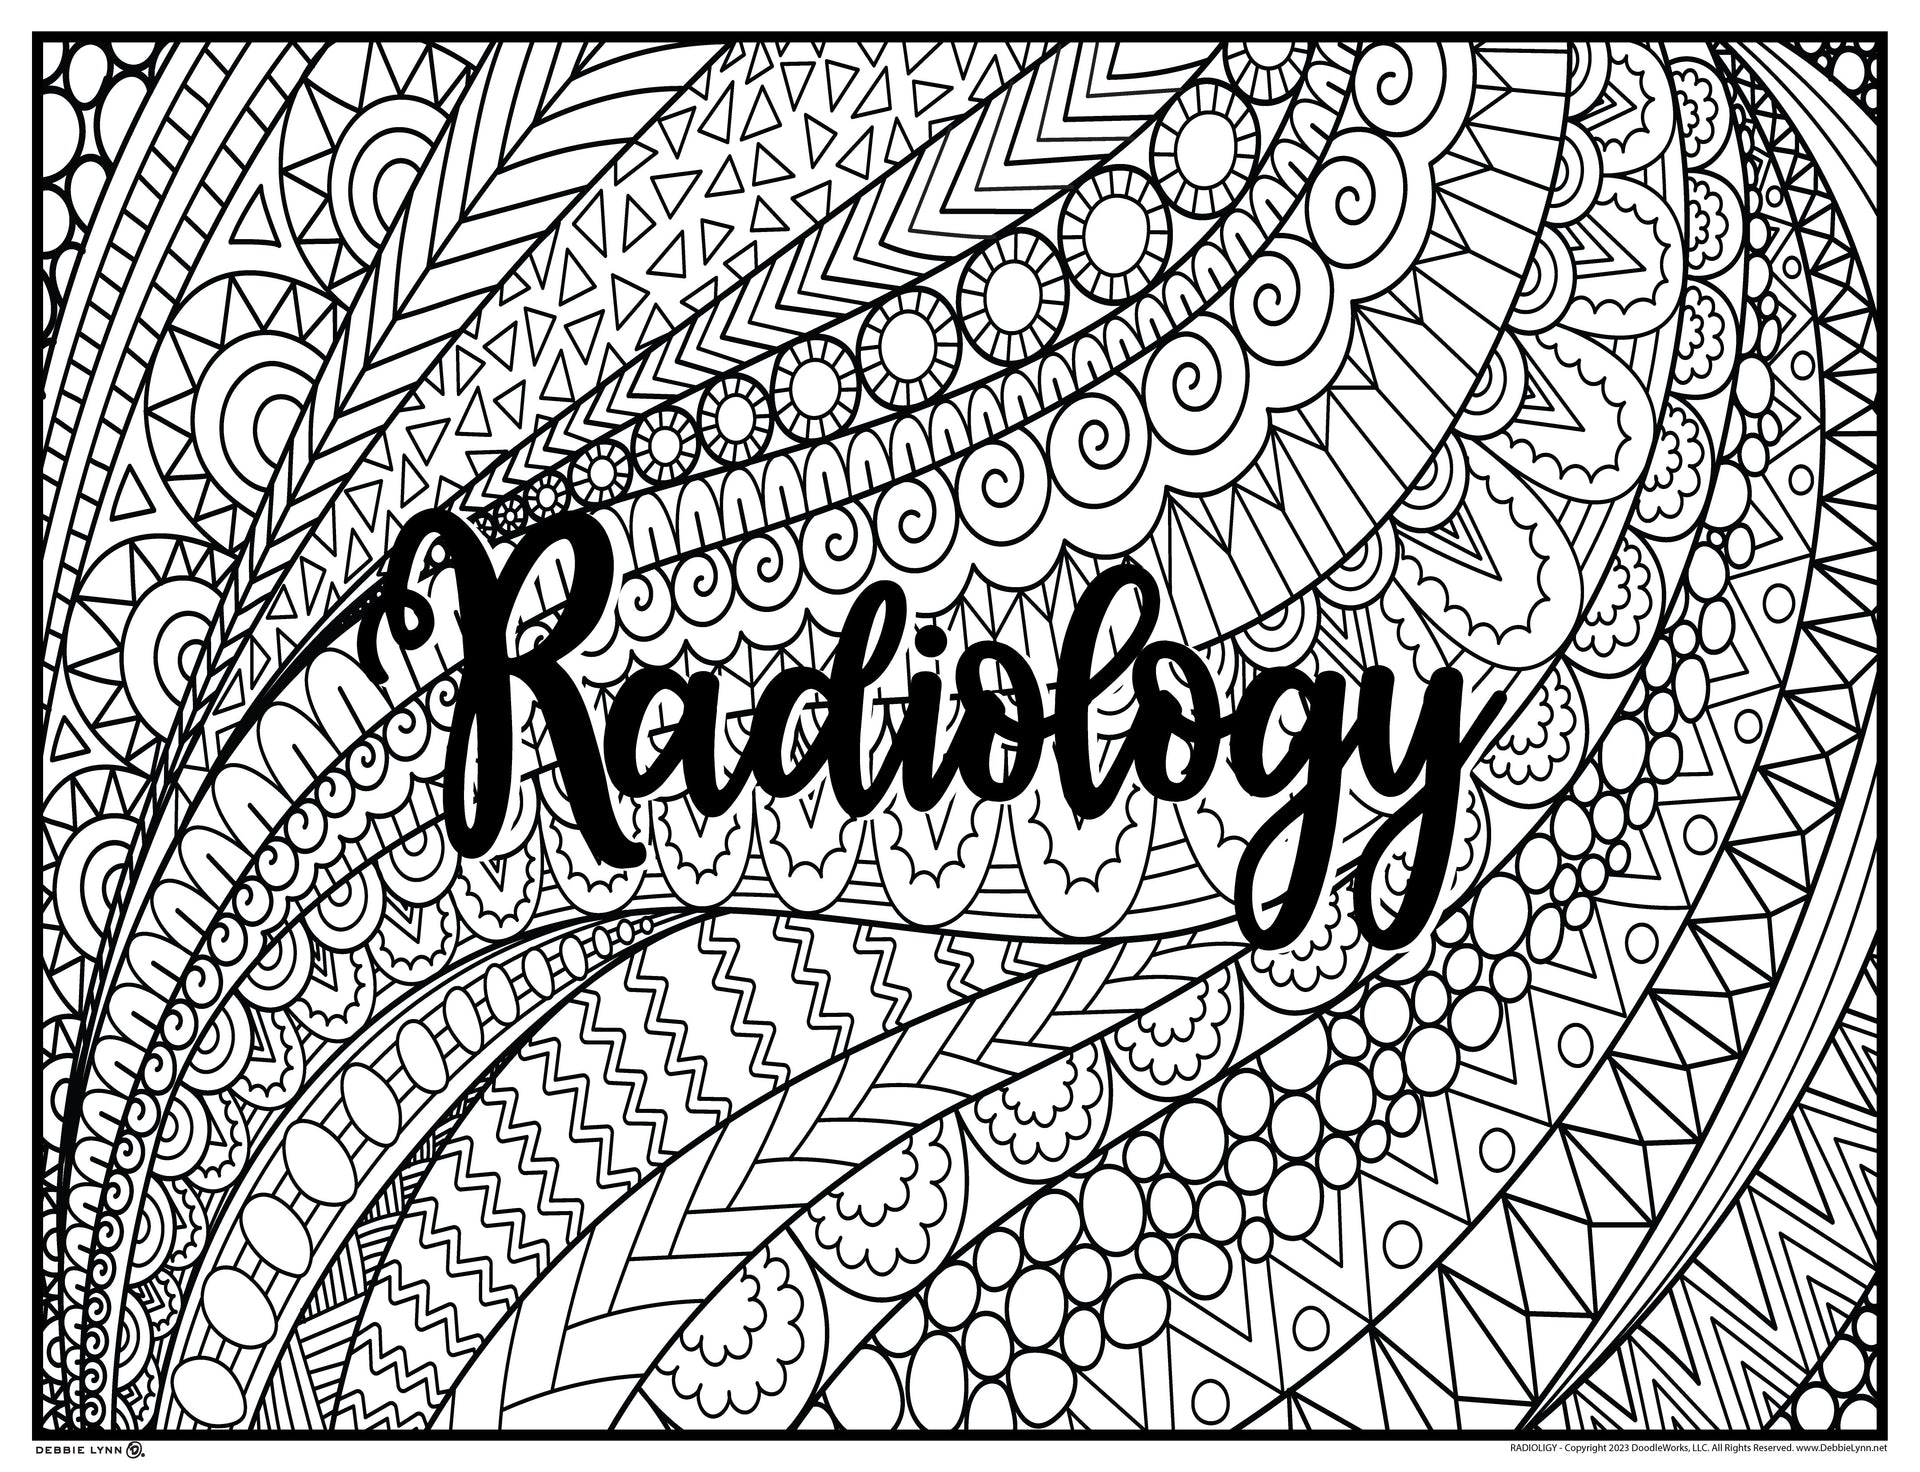 Radiology Personalized Giant Coloring